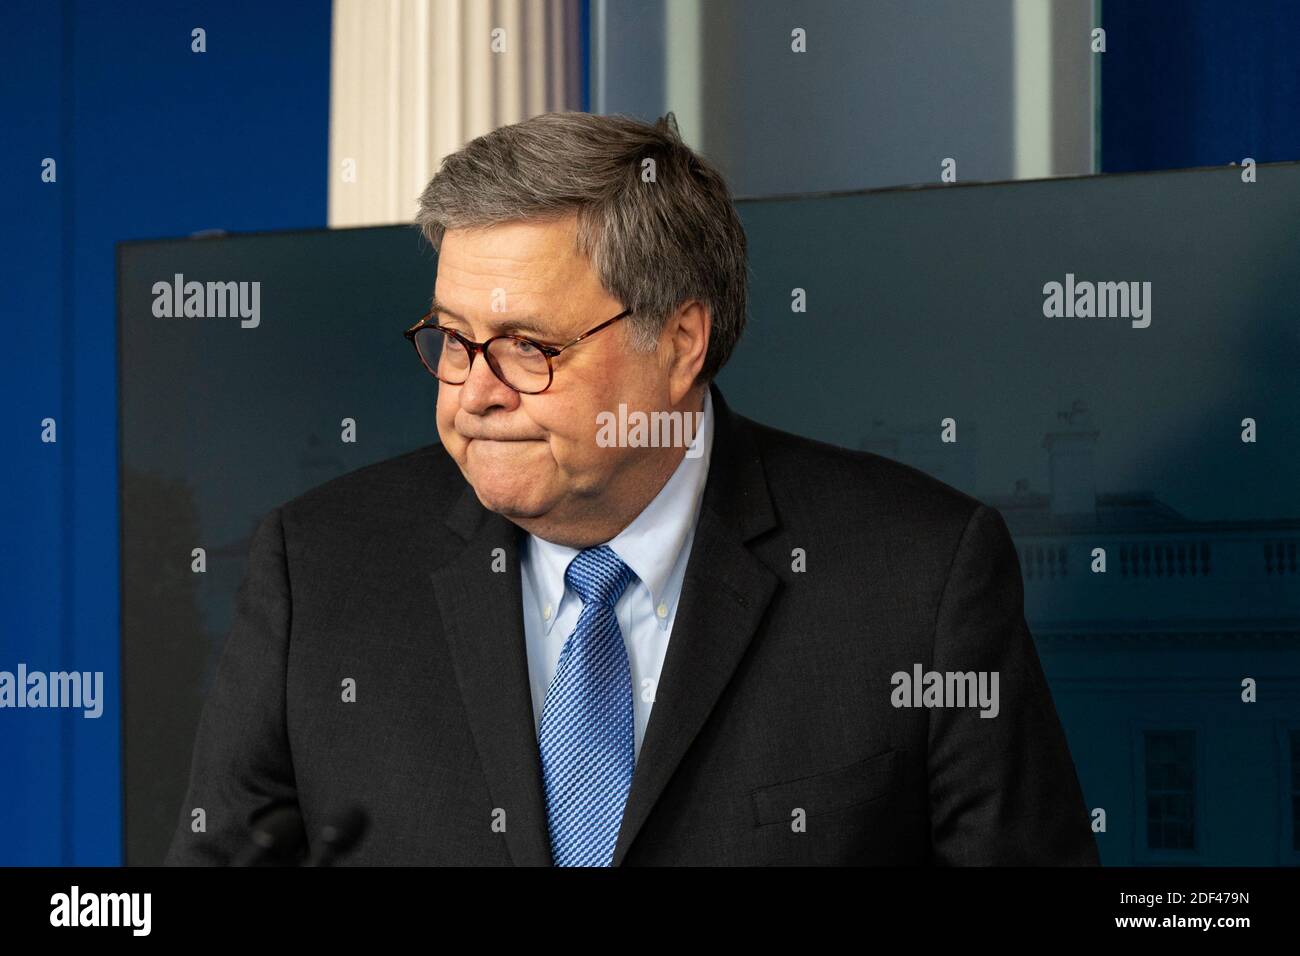 United States Attorney General William P. Barr participates in a news briefing by members of the Coronavirus Task Force at the White House on March 23, 2020 in Washington, DC, USA. Photo by Chris Kleponis/Pool/ABACAPRESS.COM Stock Photo